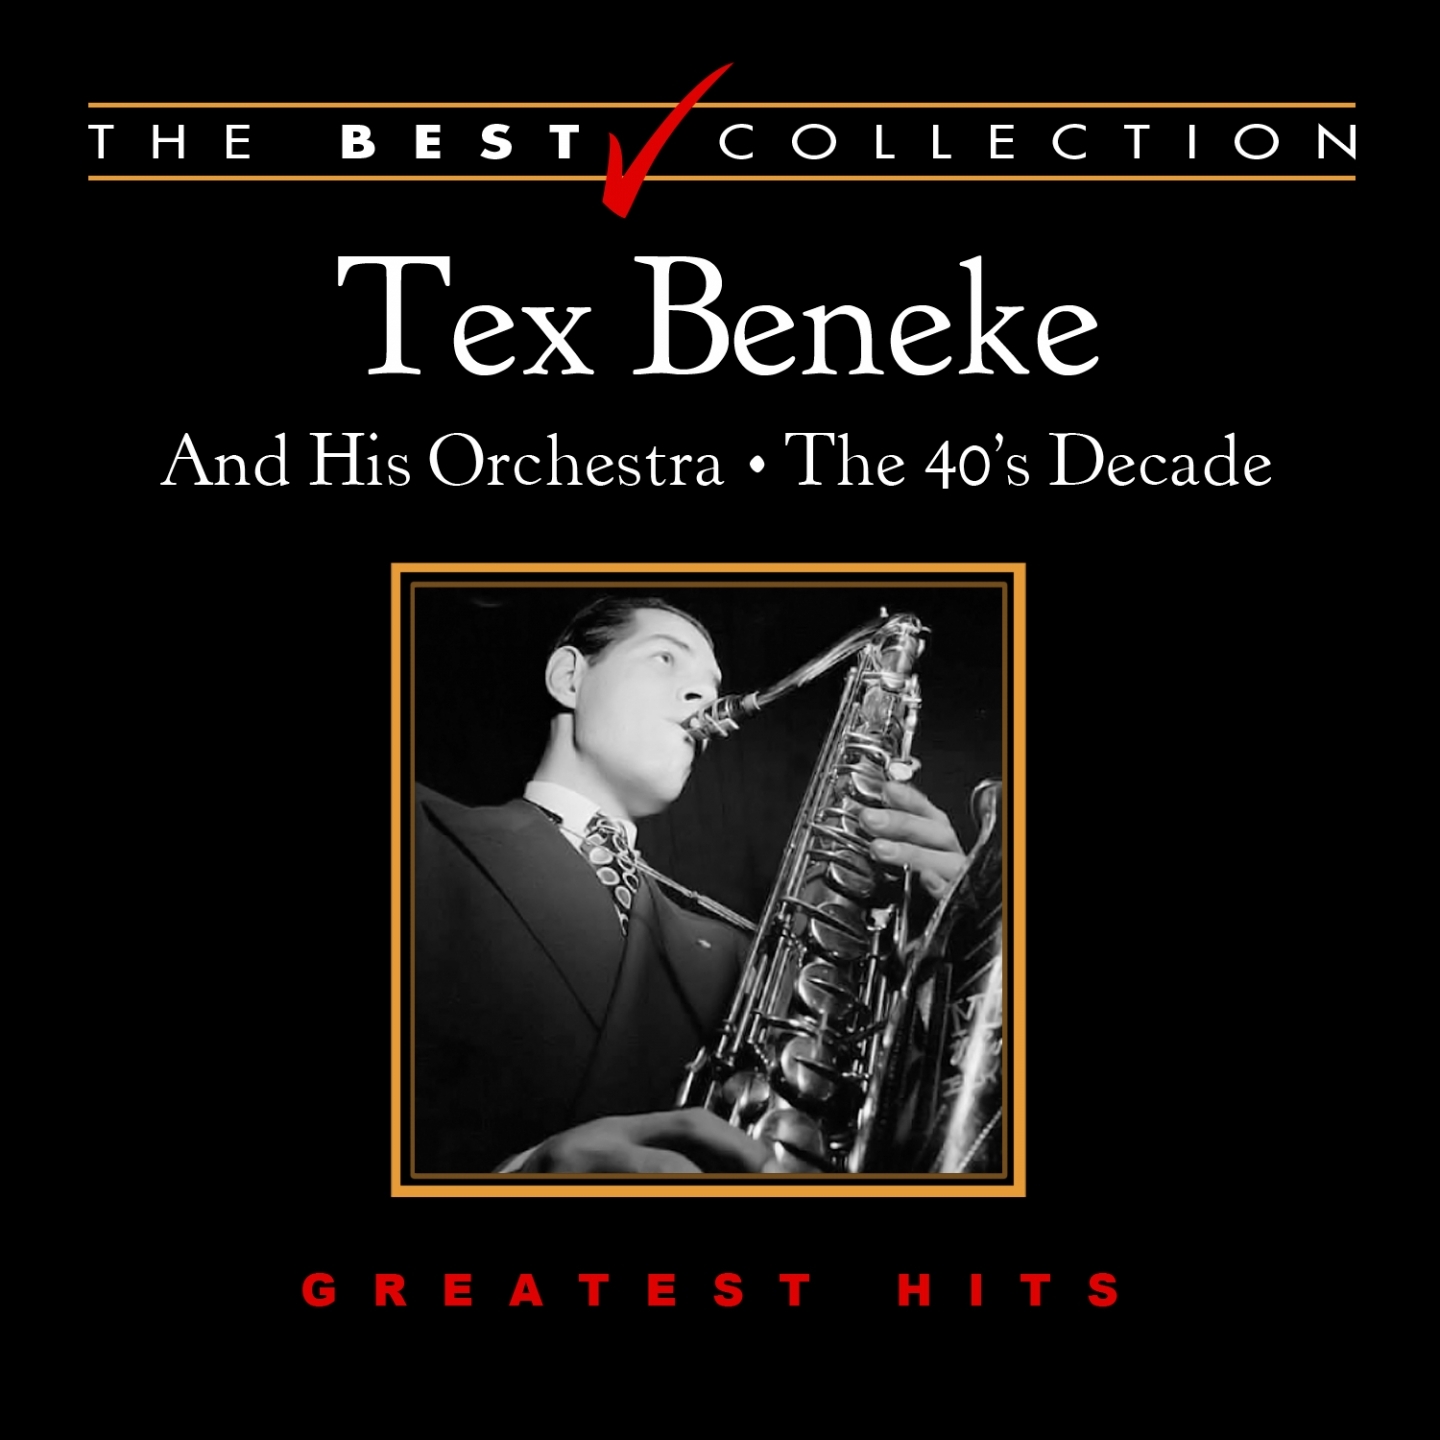 The Best Collection: Tex Beneke the 40's Decade